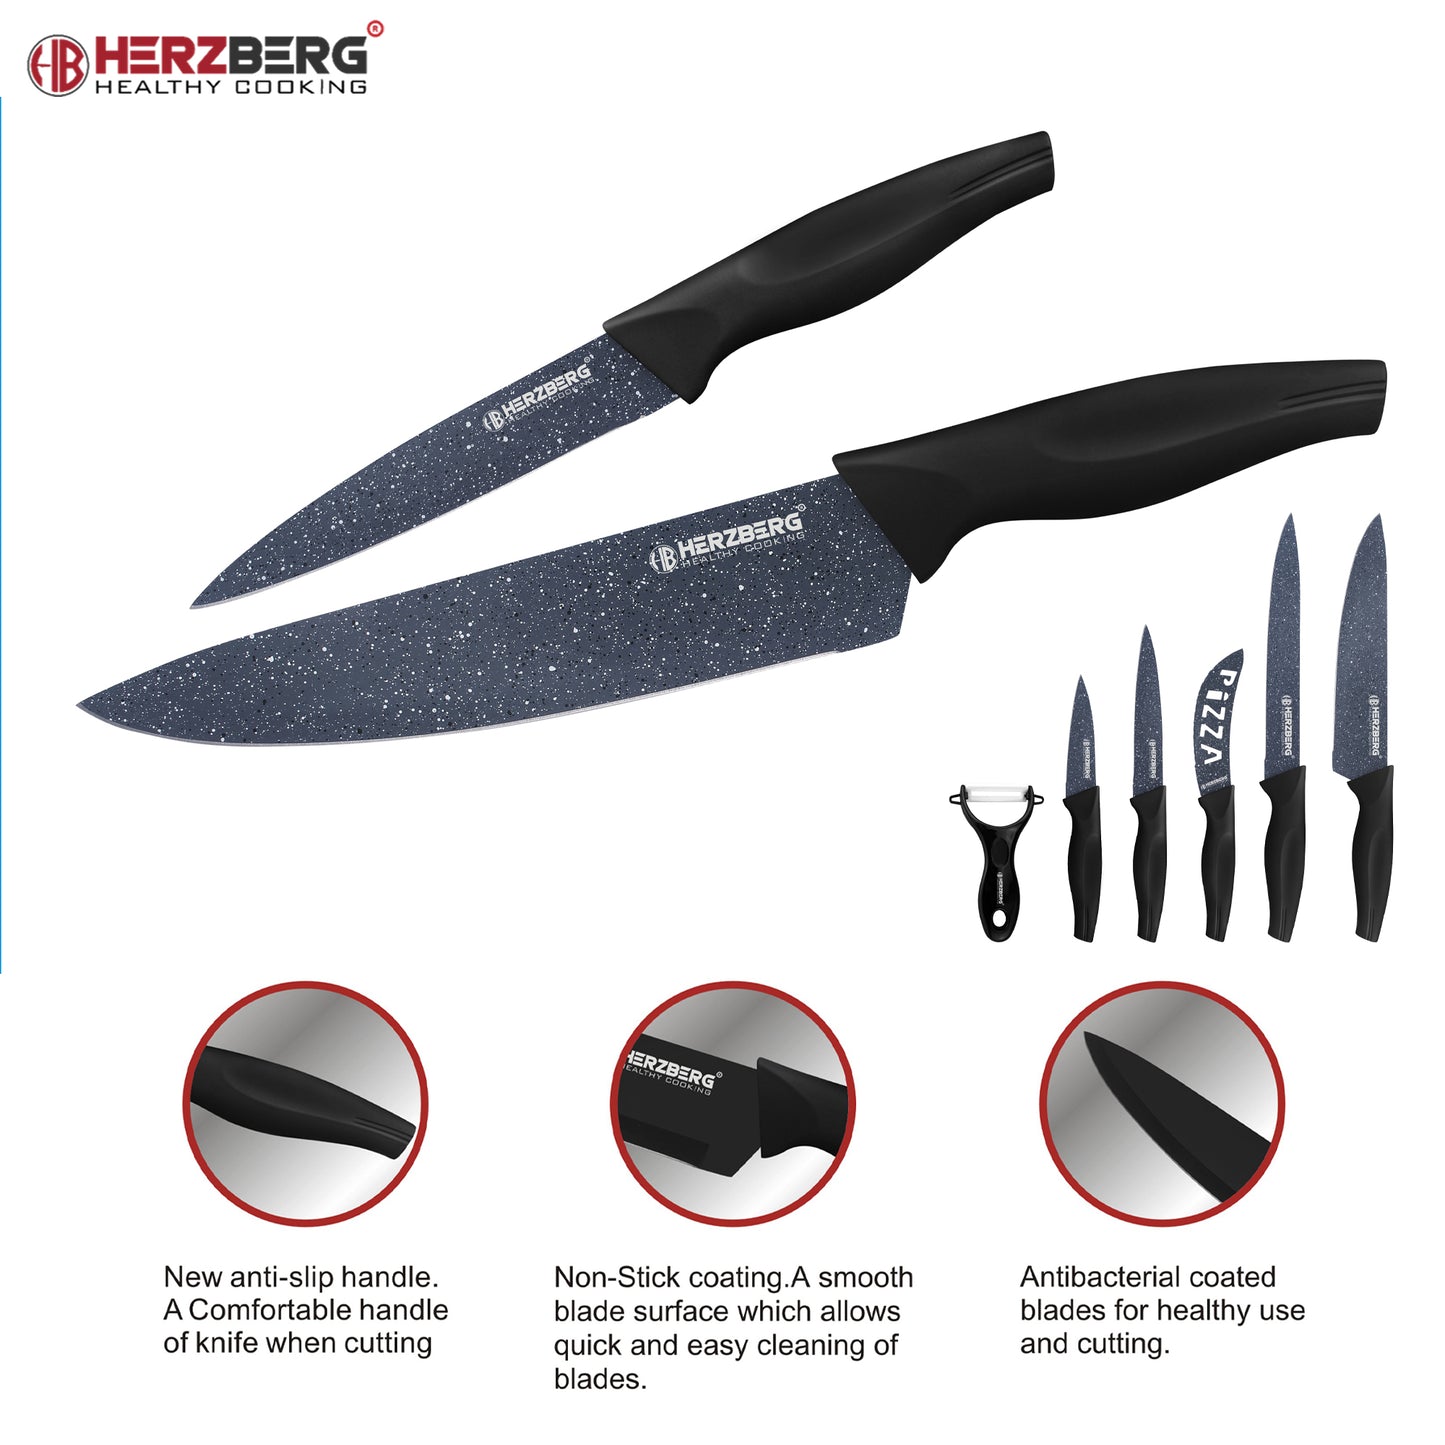 Herzberg 5 Pieces Marble Coated Knife Set - Grey Marble